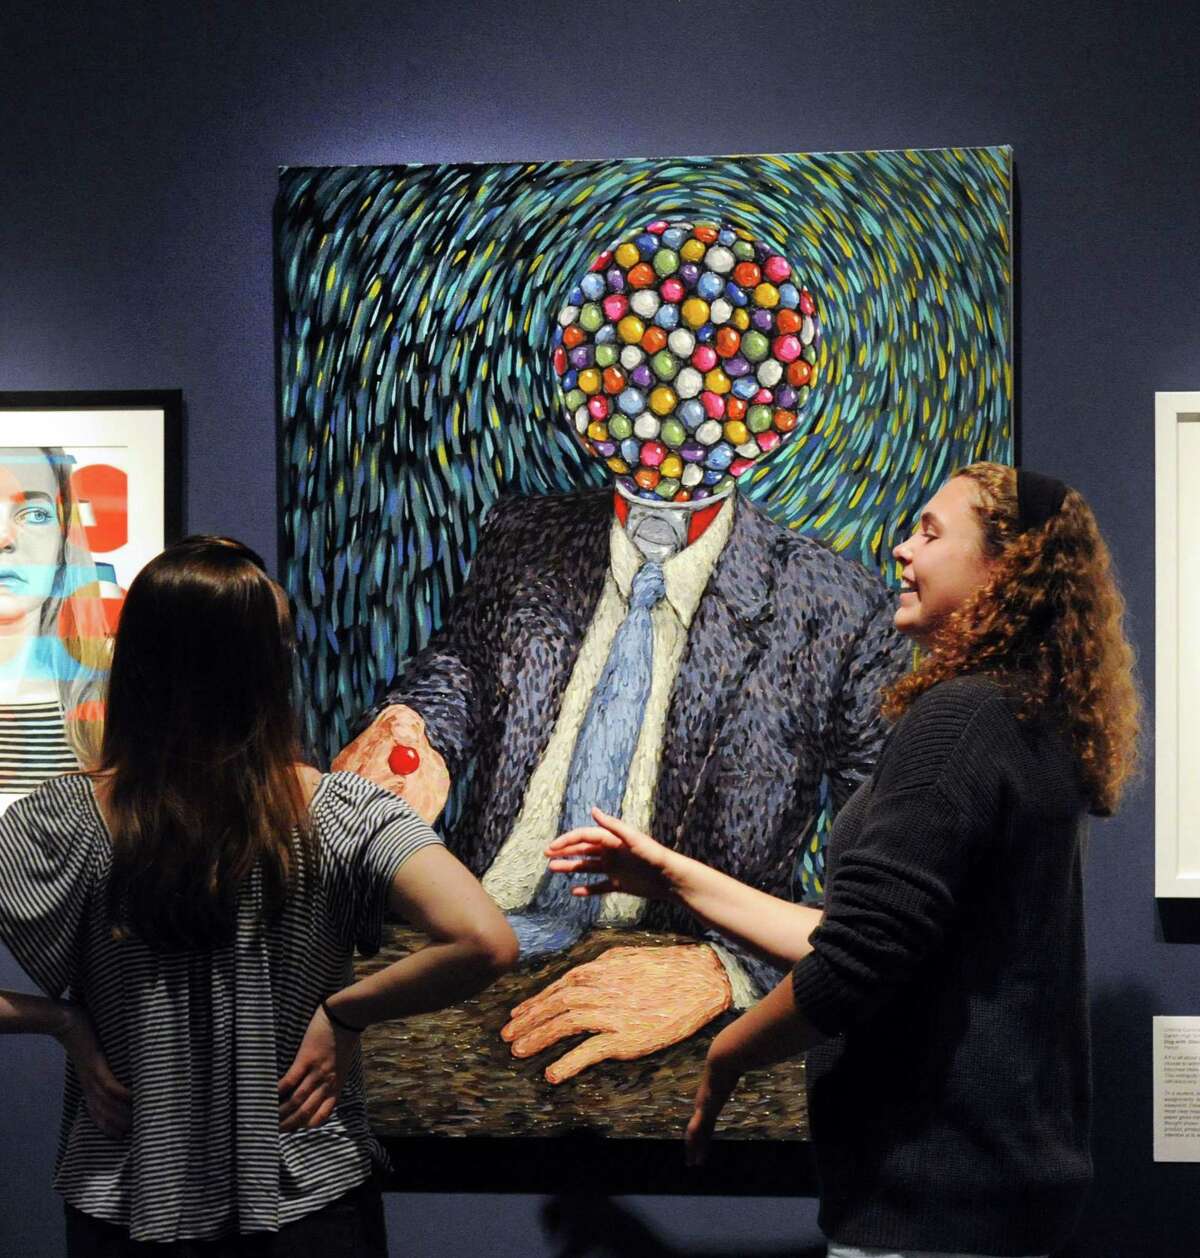 The third-place oil on canvas painting titled “Insider Trading,” by Will Carpenter, a Ridgefield High School senior, elicits a reaction out of Bruce Museum intern Megan Hobbs, right, a Darien High School senior, during the Bruce Museum’s new exhibition, iCreate, the annual juried art show featuring the work of high school students at the museum in Greenwich, Conn., Thursday, June 15, 2017. The exhibition runs until July 30th and features 42 artworks chosen out of over 700 entries received from high school students in the states of Connecticut and New York.